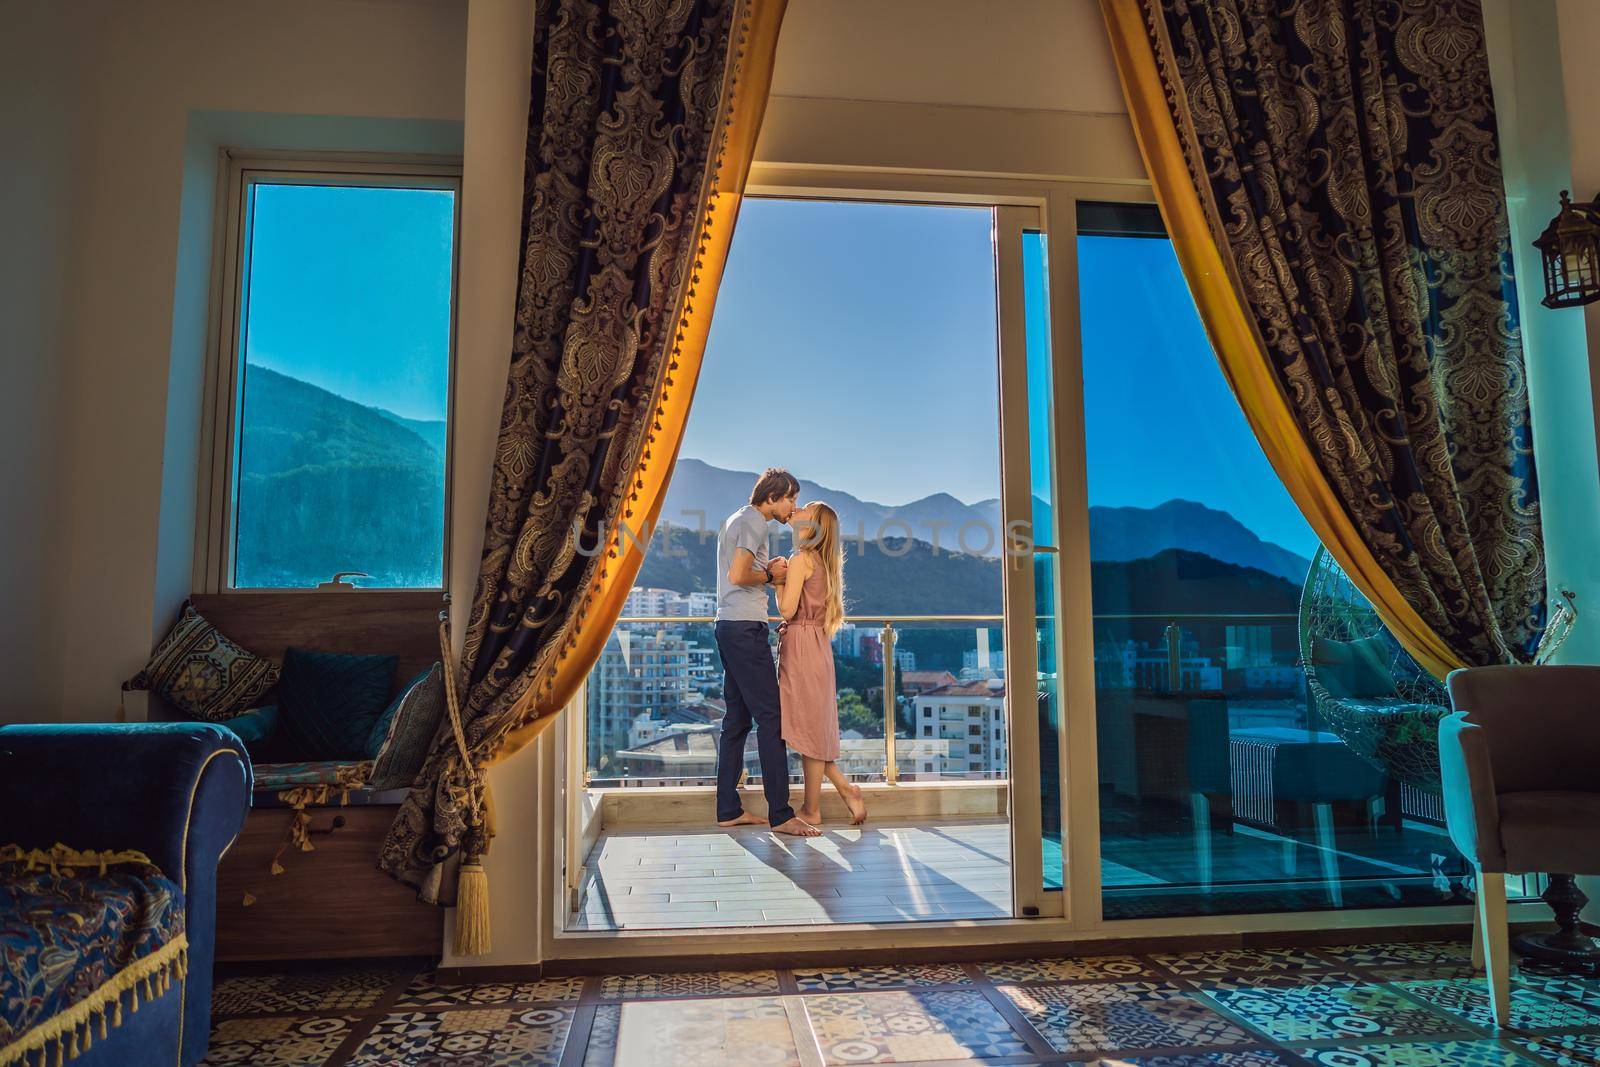 Couple on the balcony against the backdrop of mountains and city, Montenegro. life terrace pretty happiness summer home. Inspiration city romantic hotel.